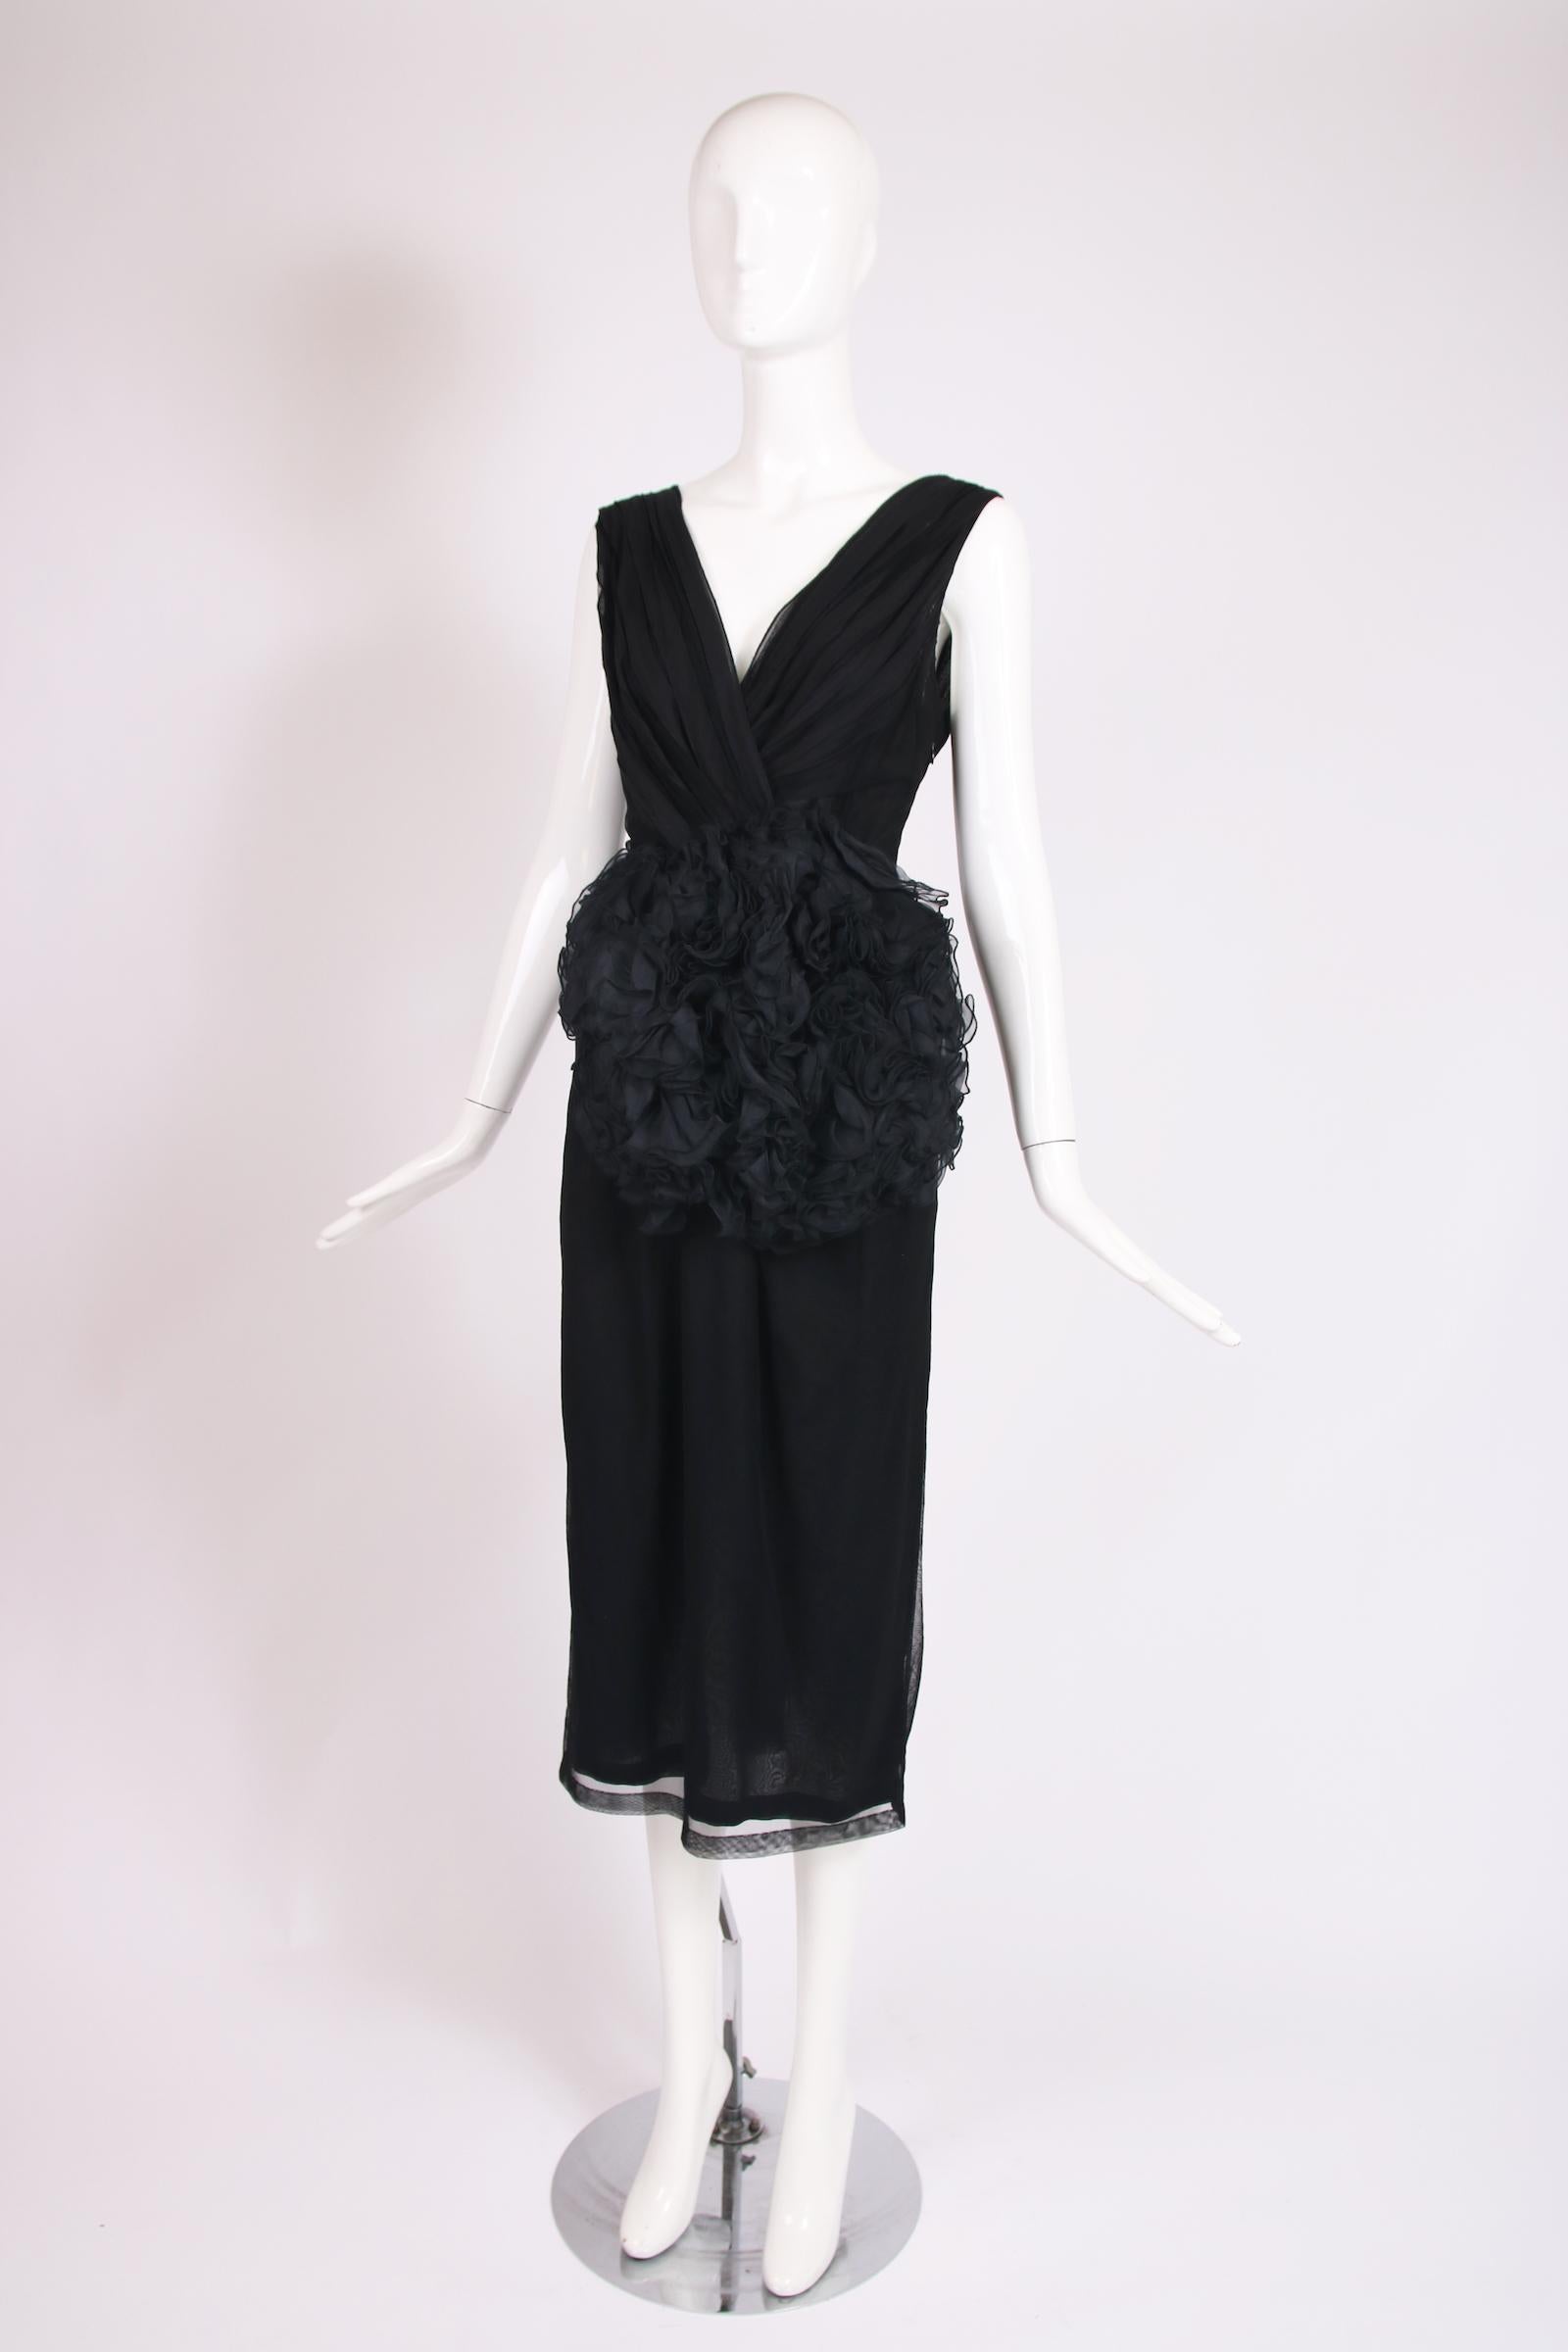 Dries Van Noten black 100% silk sleeveless deep V-neck cocktail dress with oversized silk flower embellishment at the front. Size 38. In excellent condition.

Bust - 32